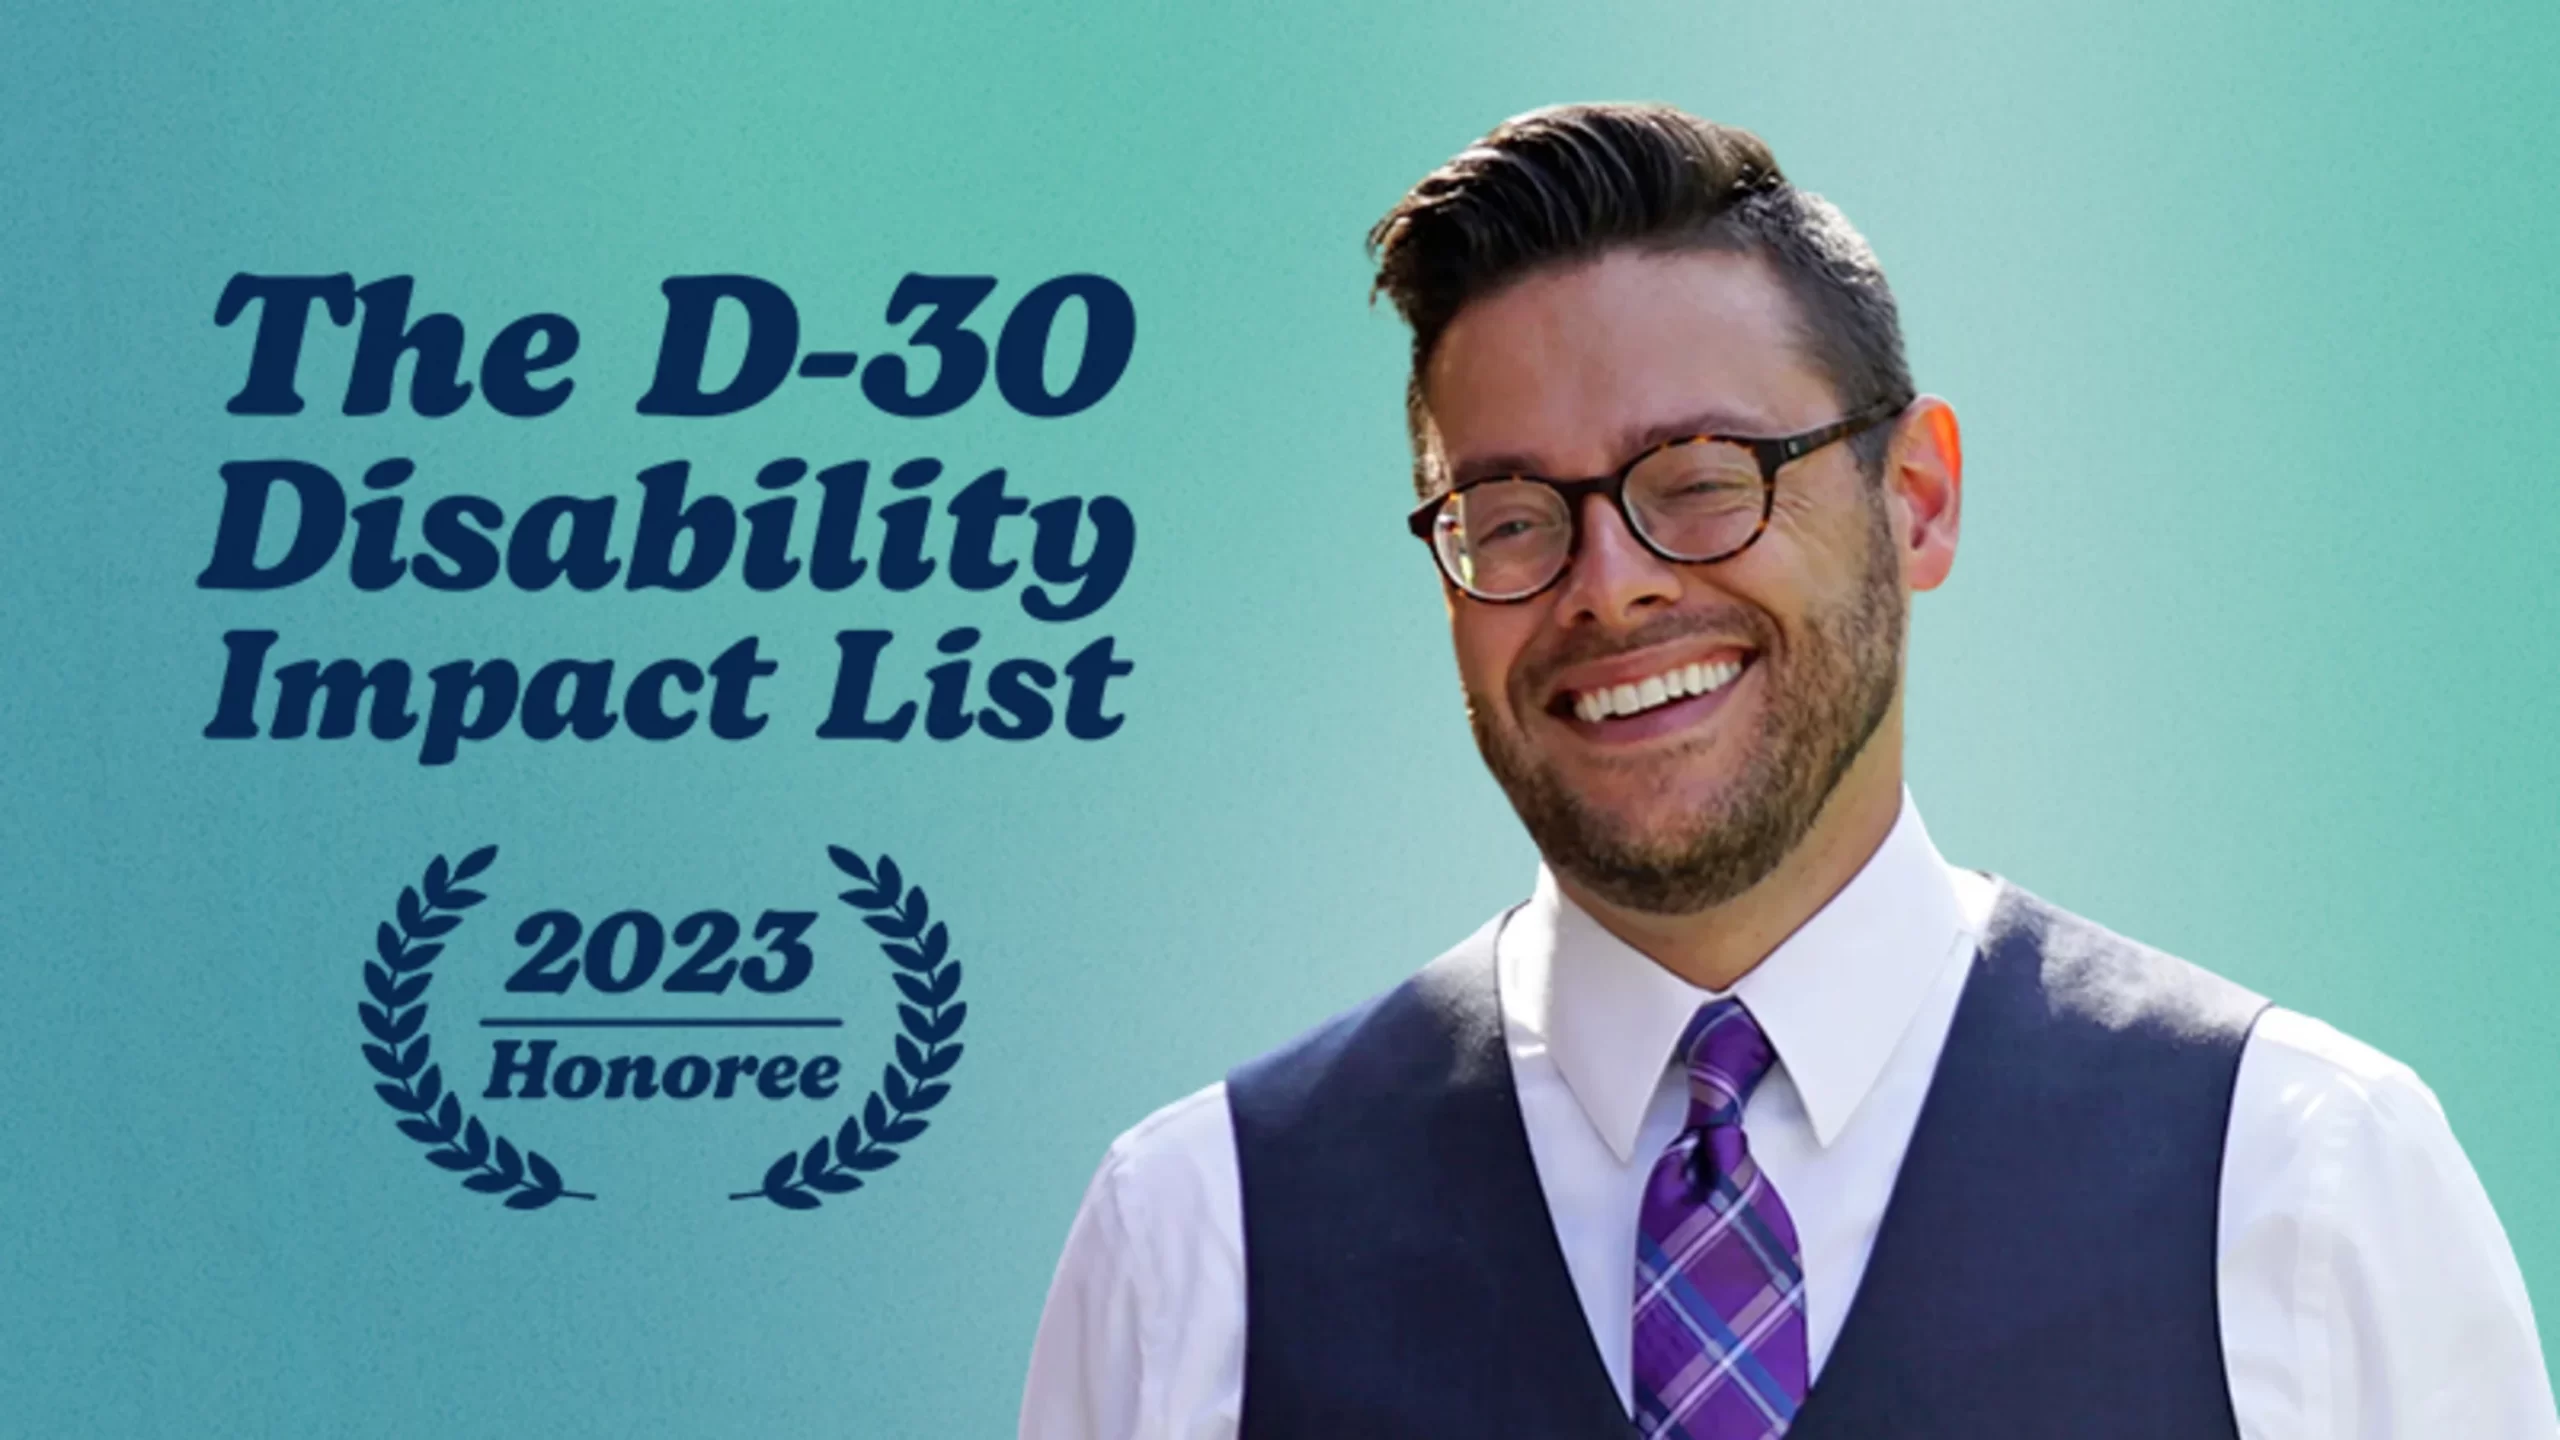 D-30 Disability Impact List Honoree